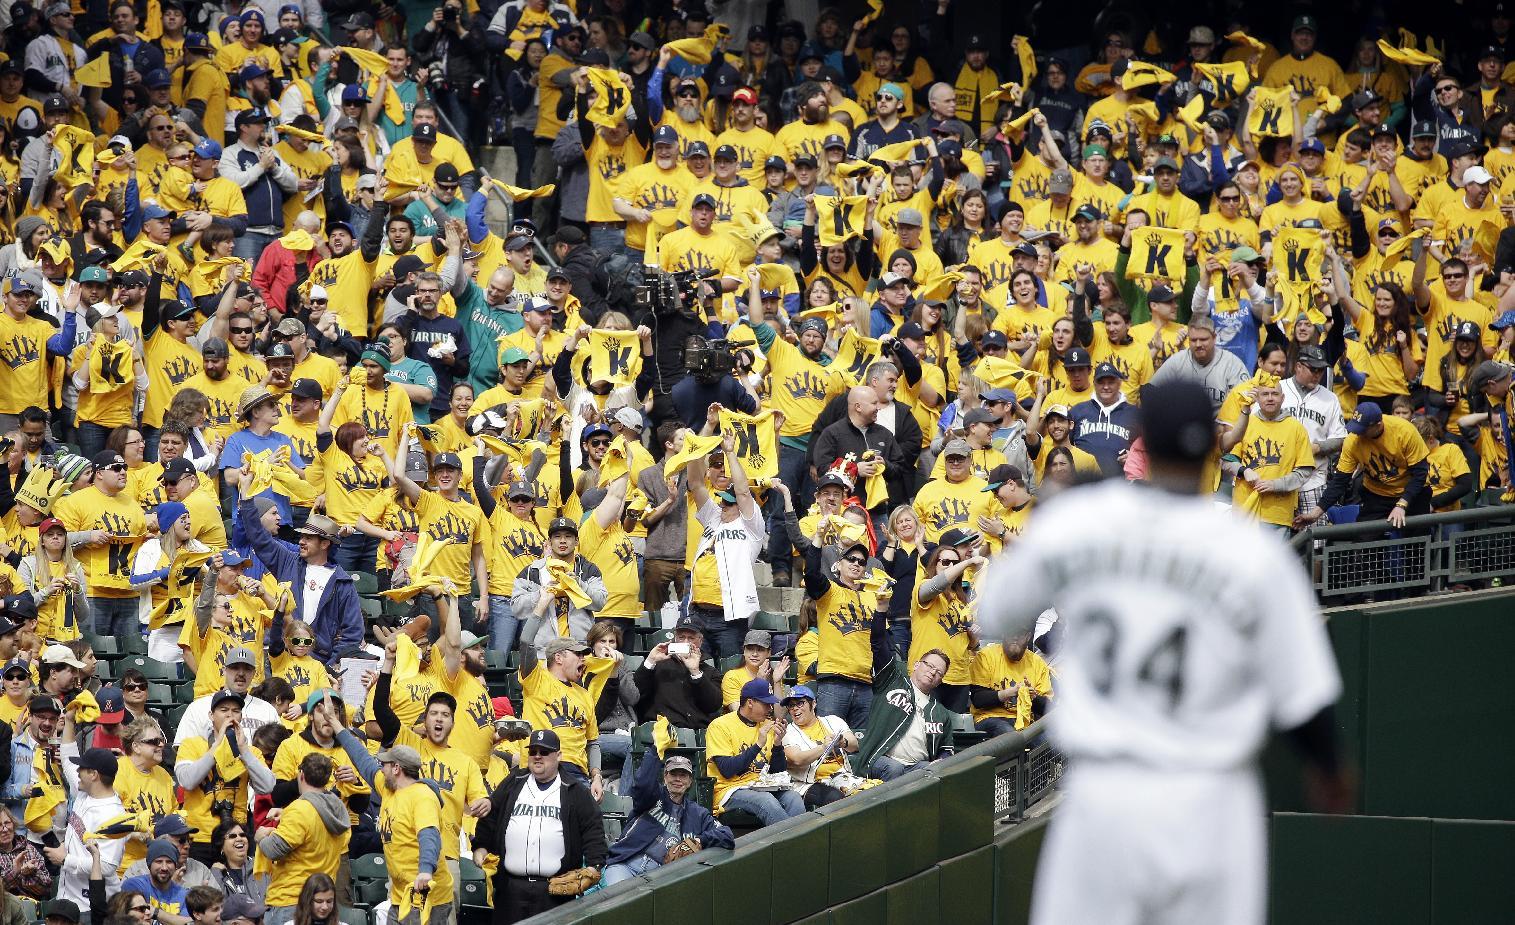 King Felix Hernandez and his court in Seattle. (AP)